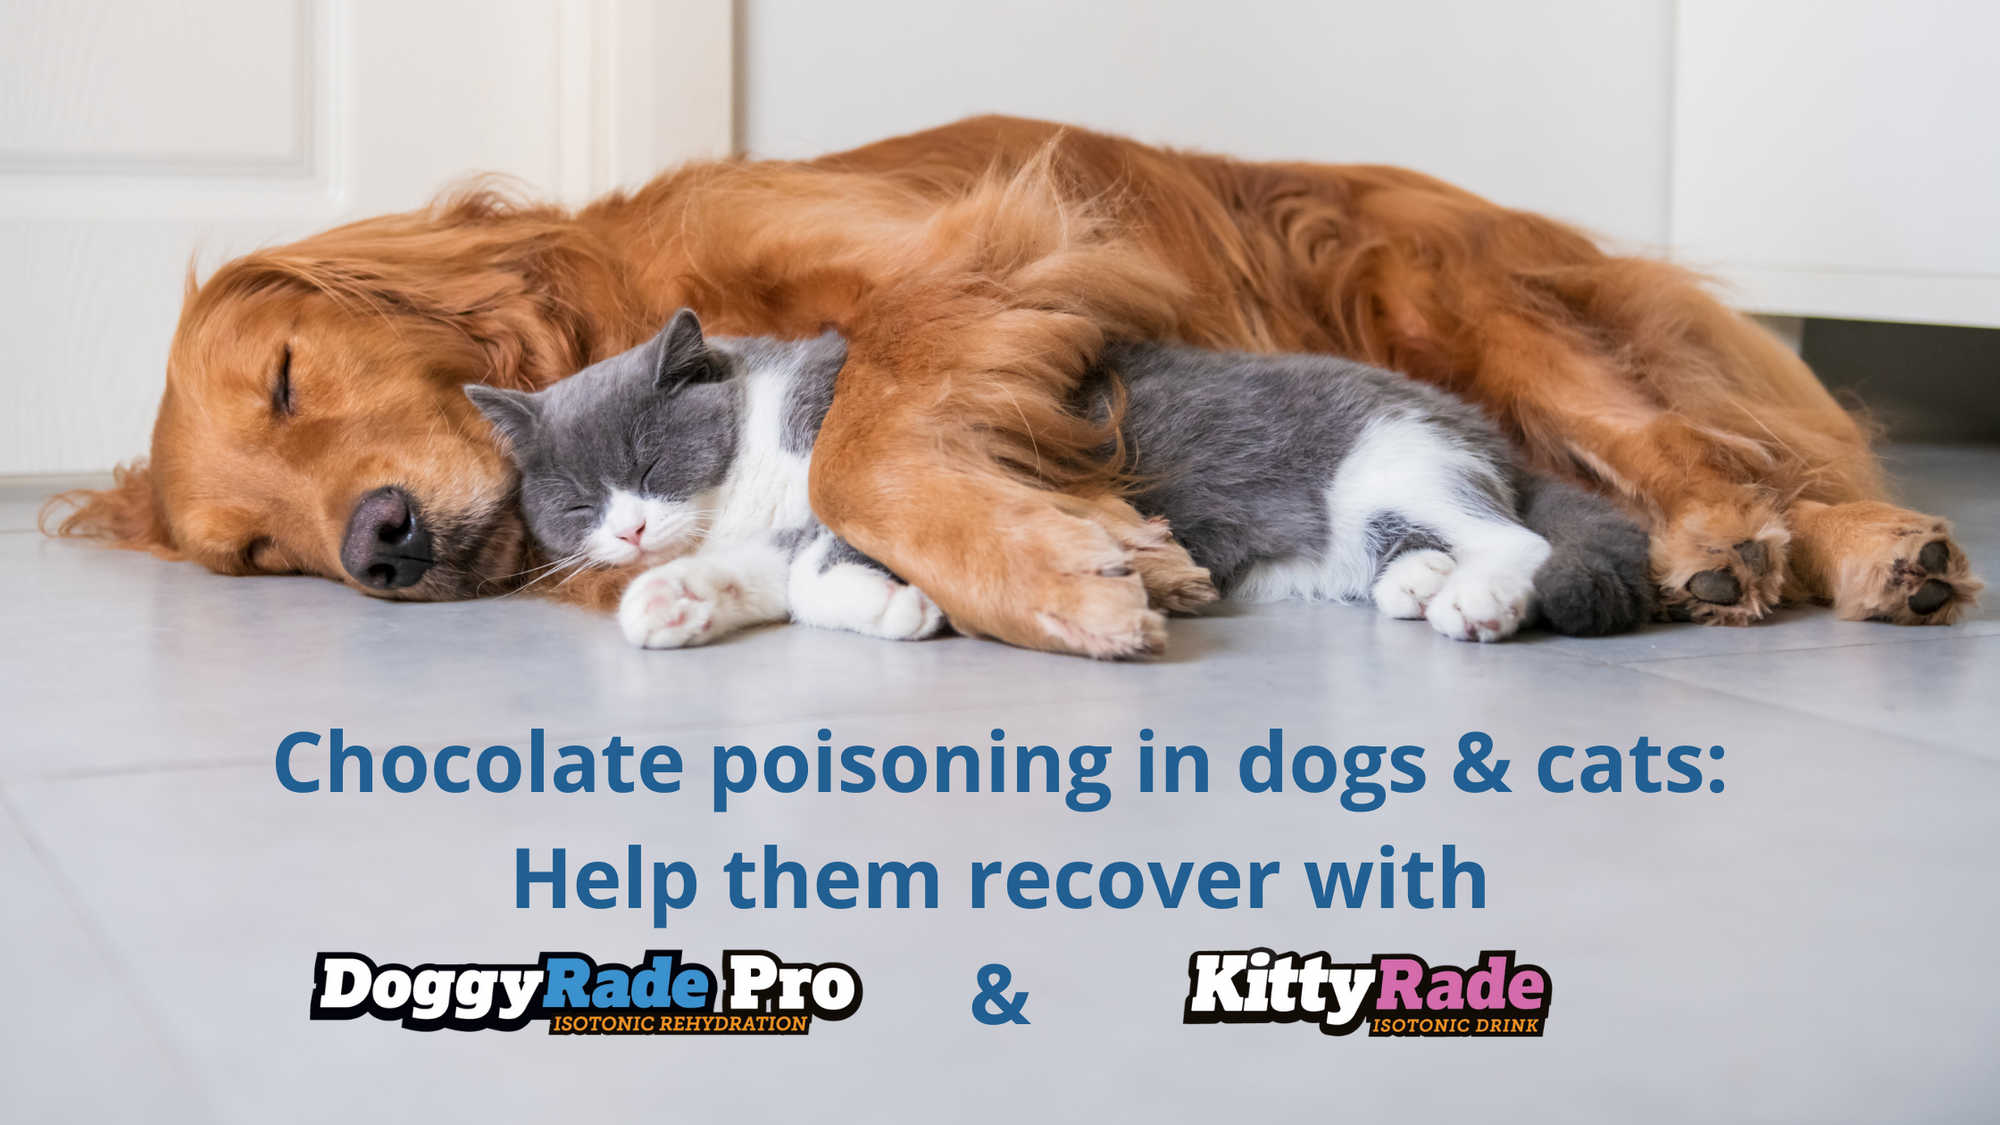 Chocolate poisoning in dogs & cats: Help them recover with DoggyRade Pro and KittyRade